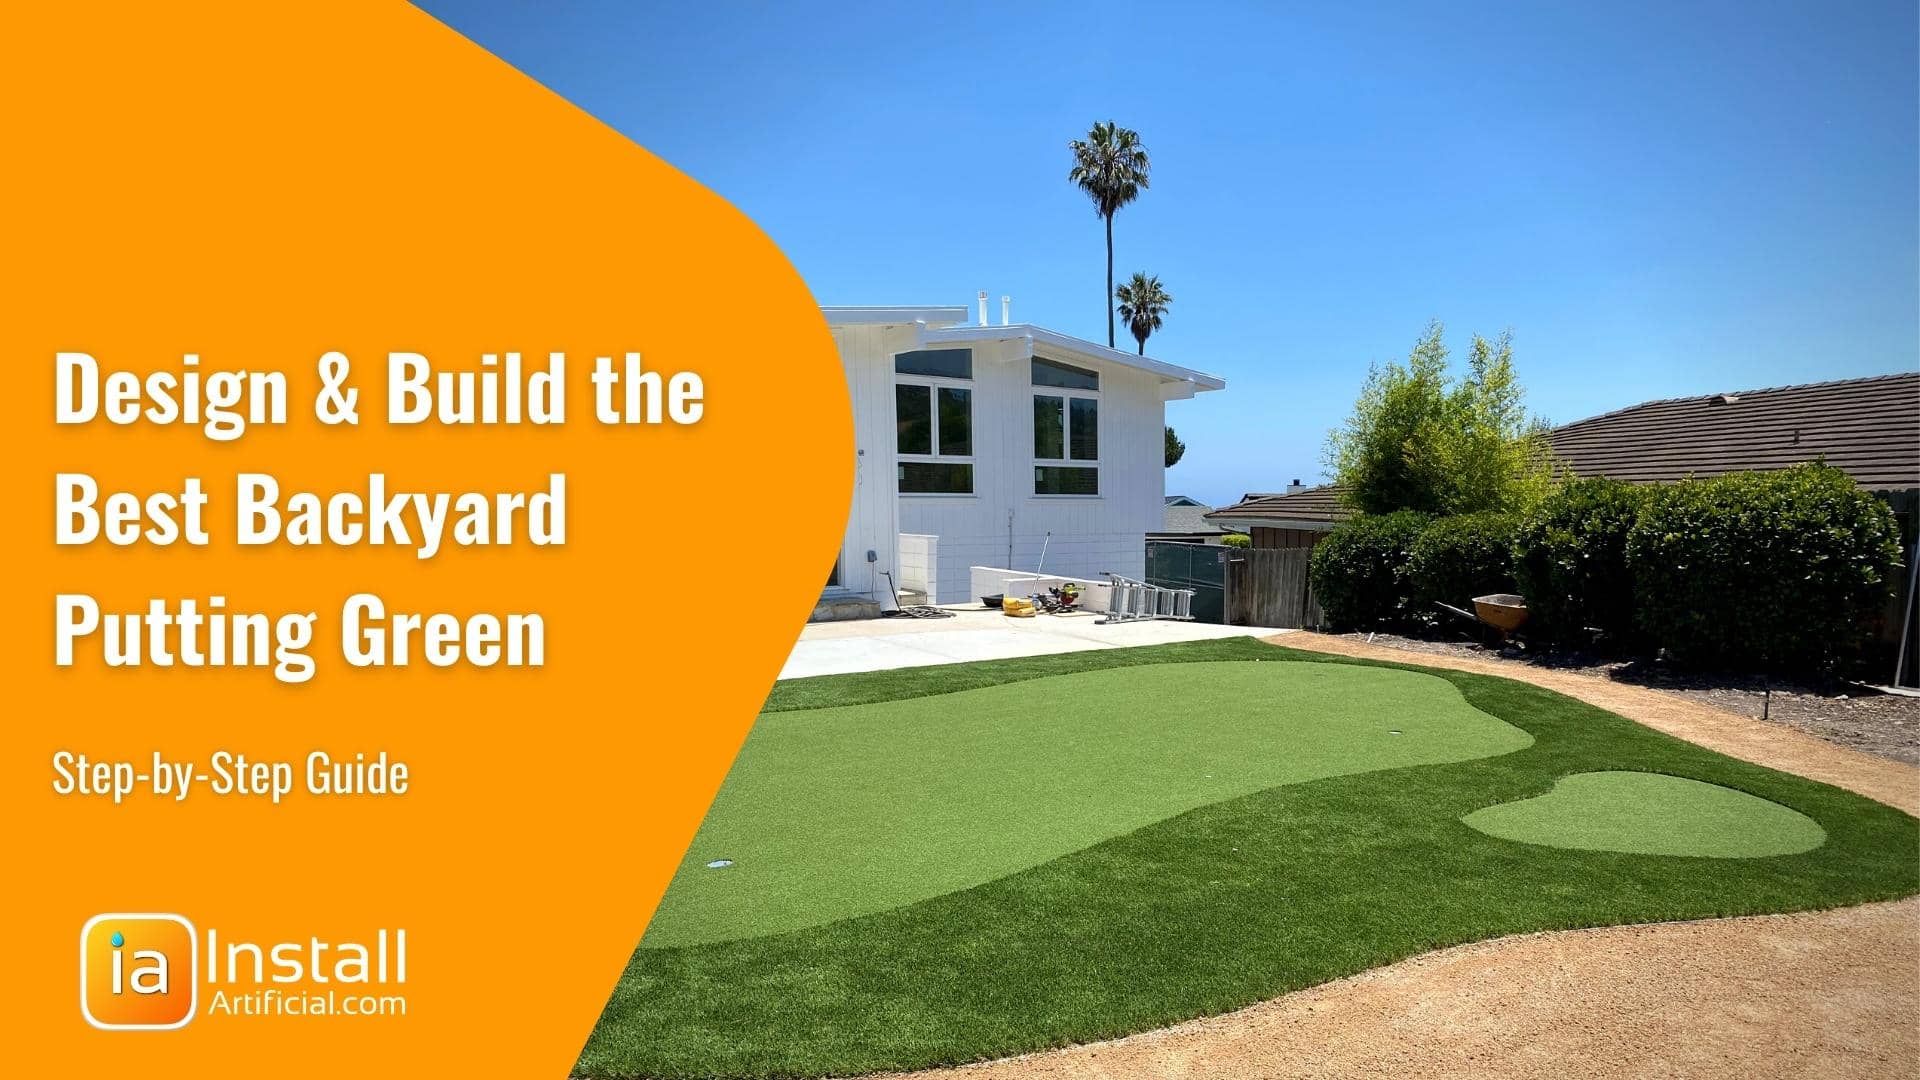 Guide to Design and Build Backyard Putting Green